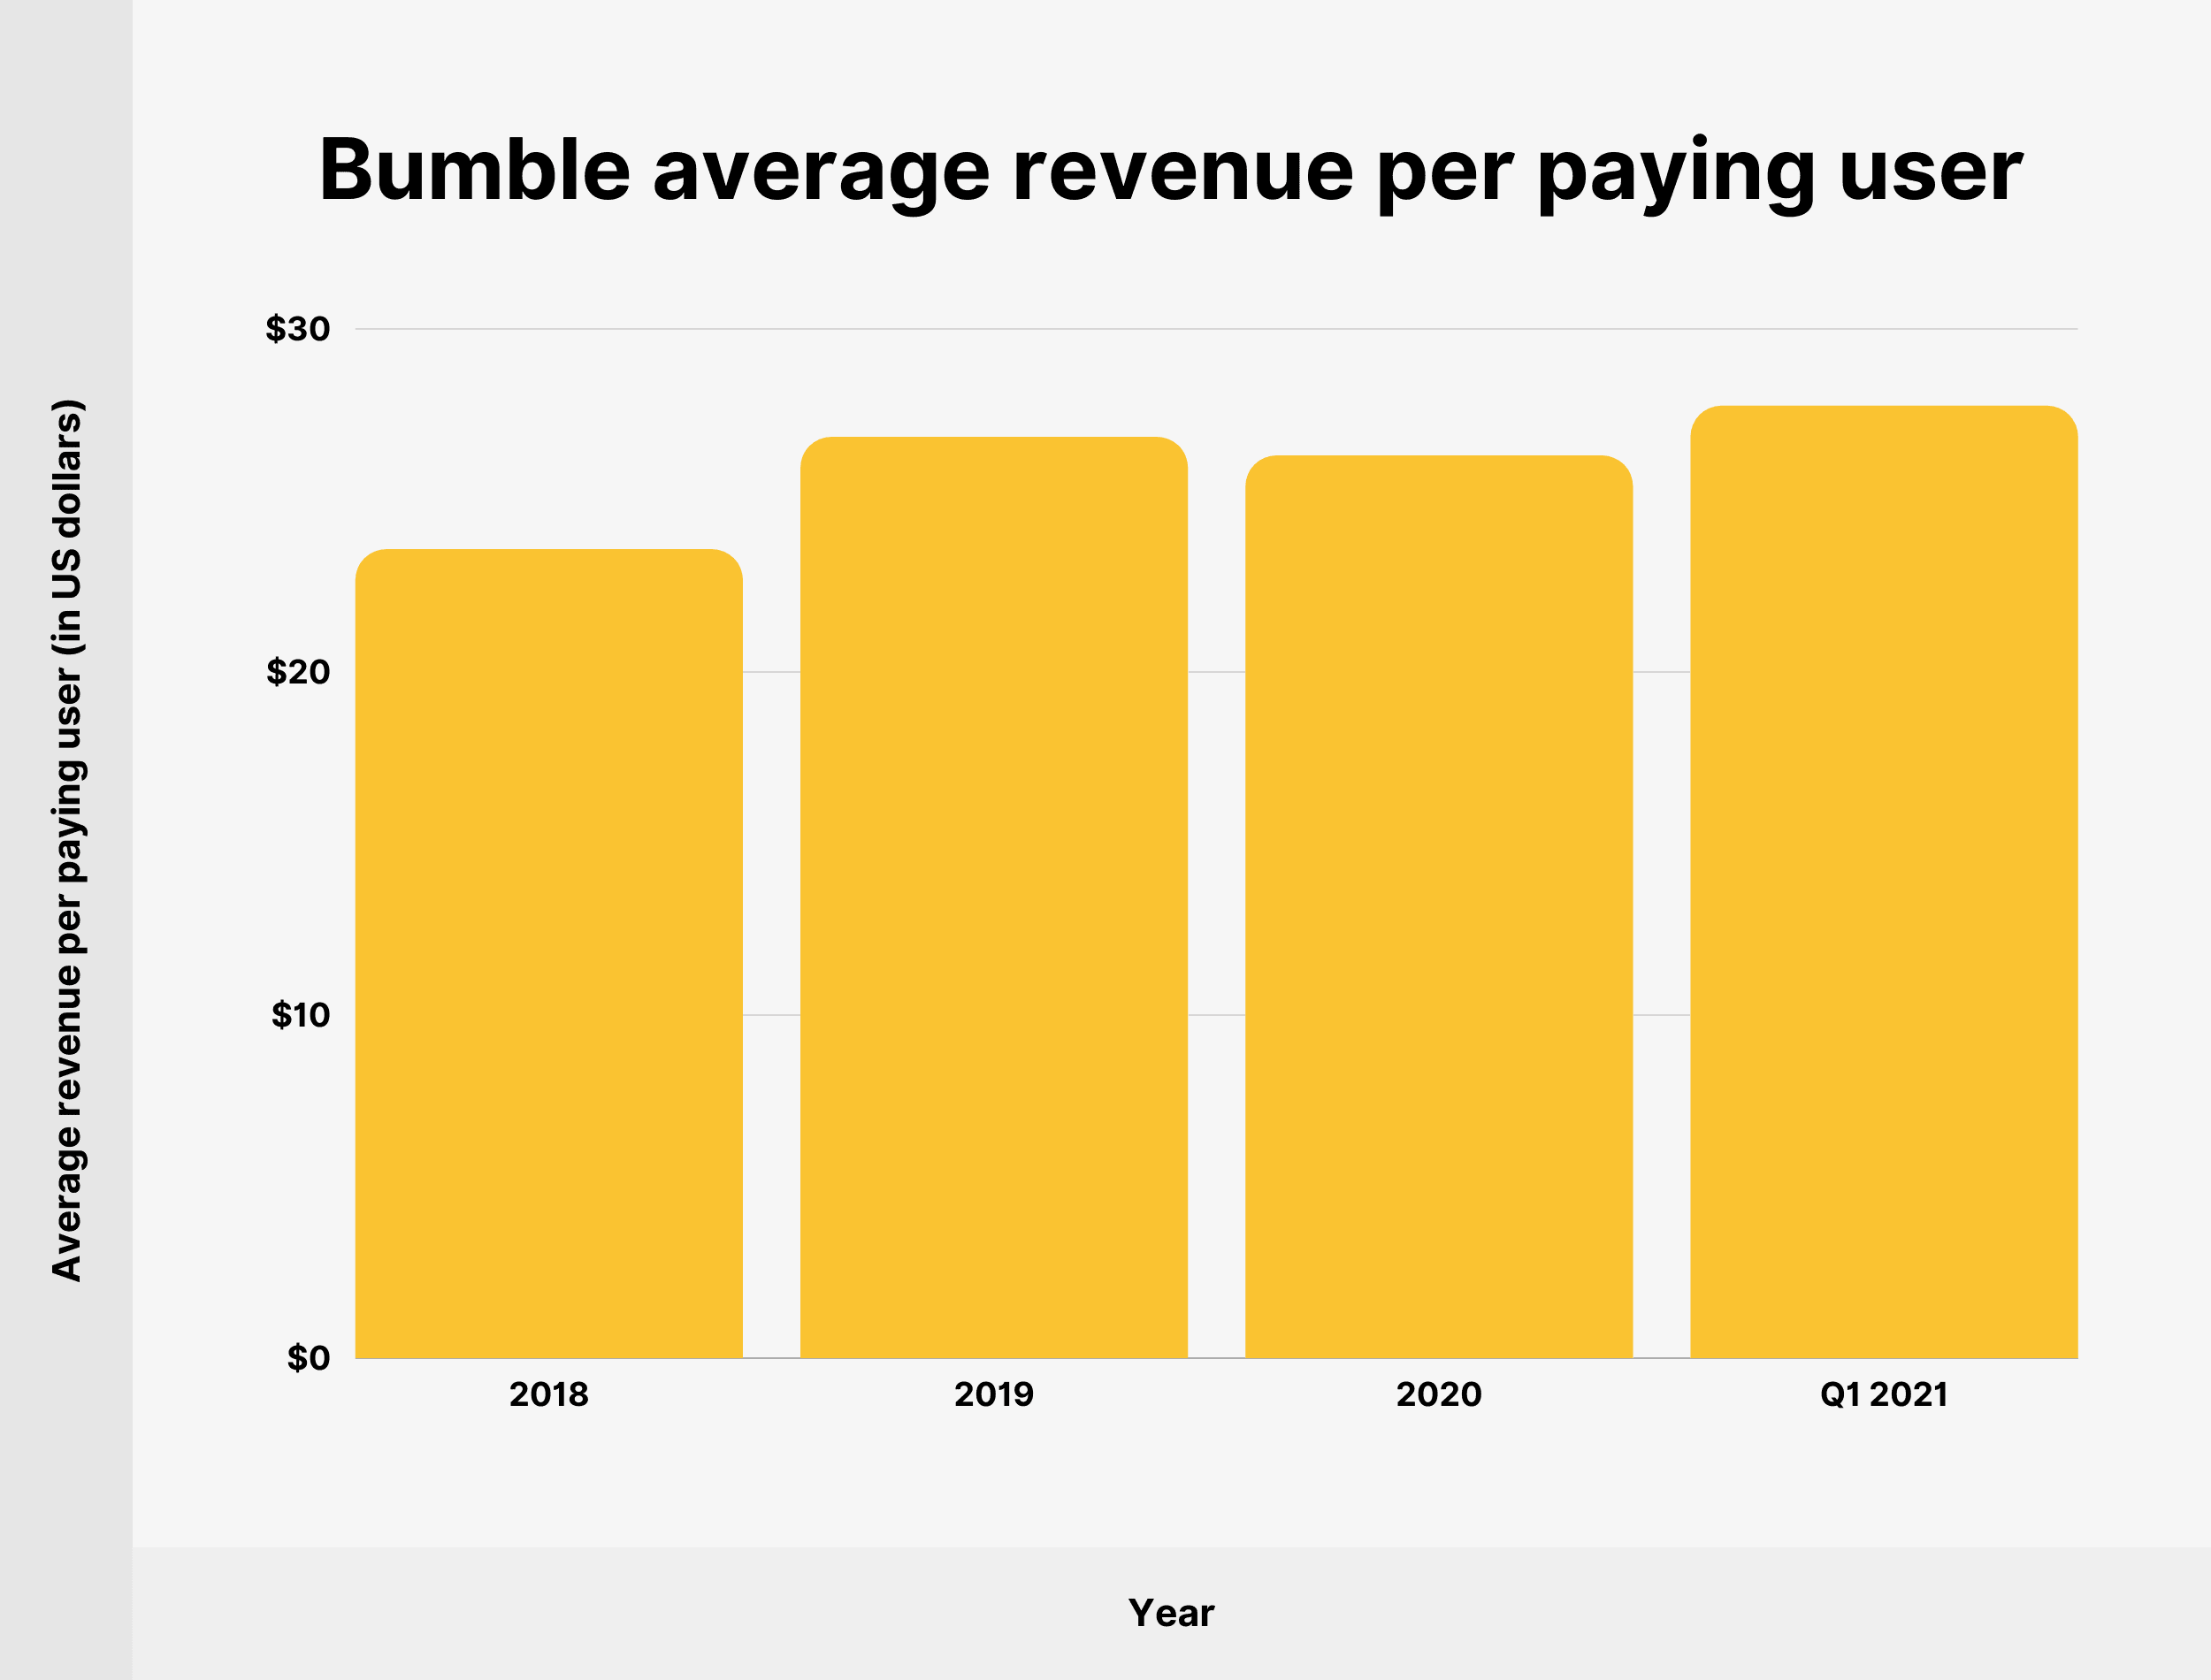 Bumble average revenue per paying user